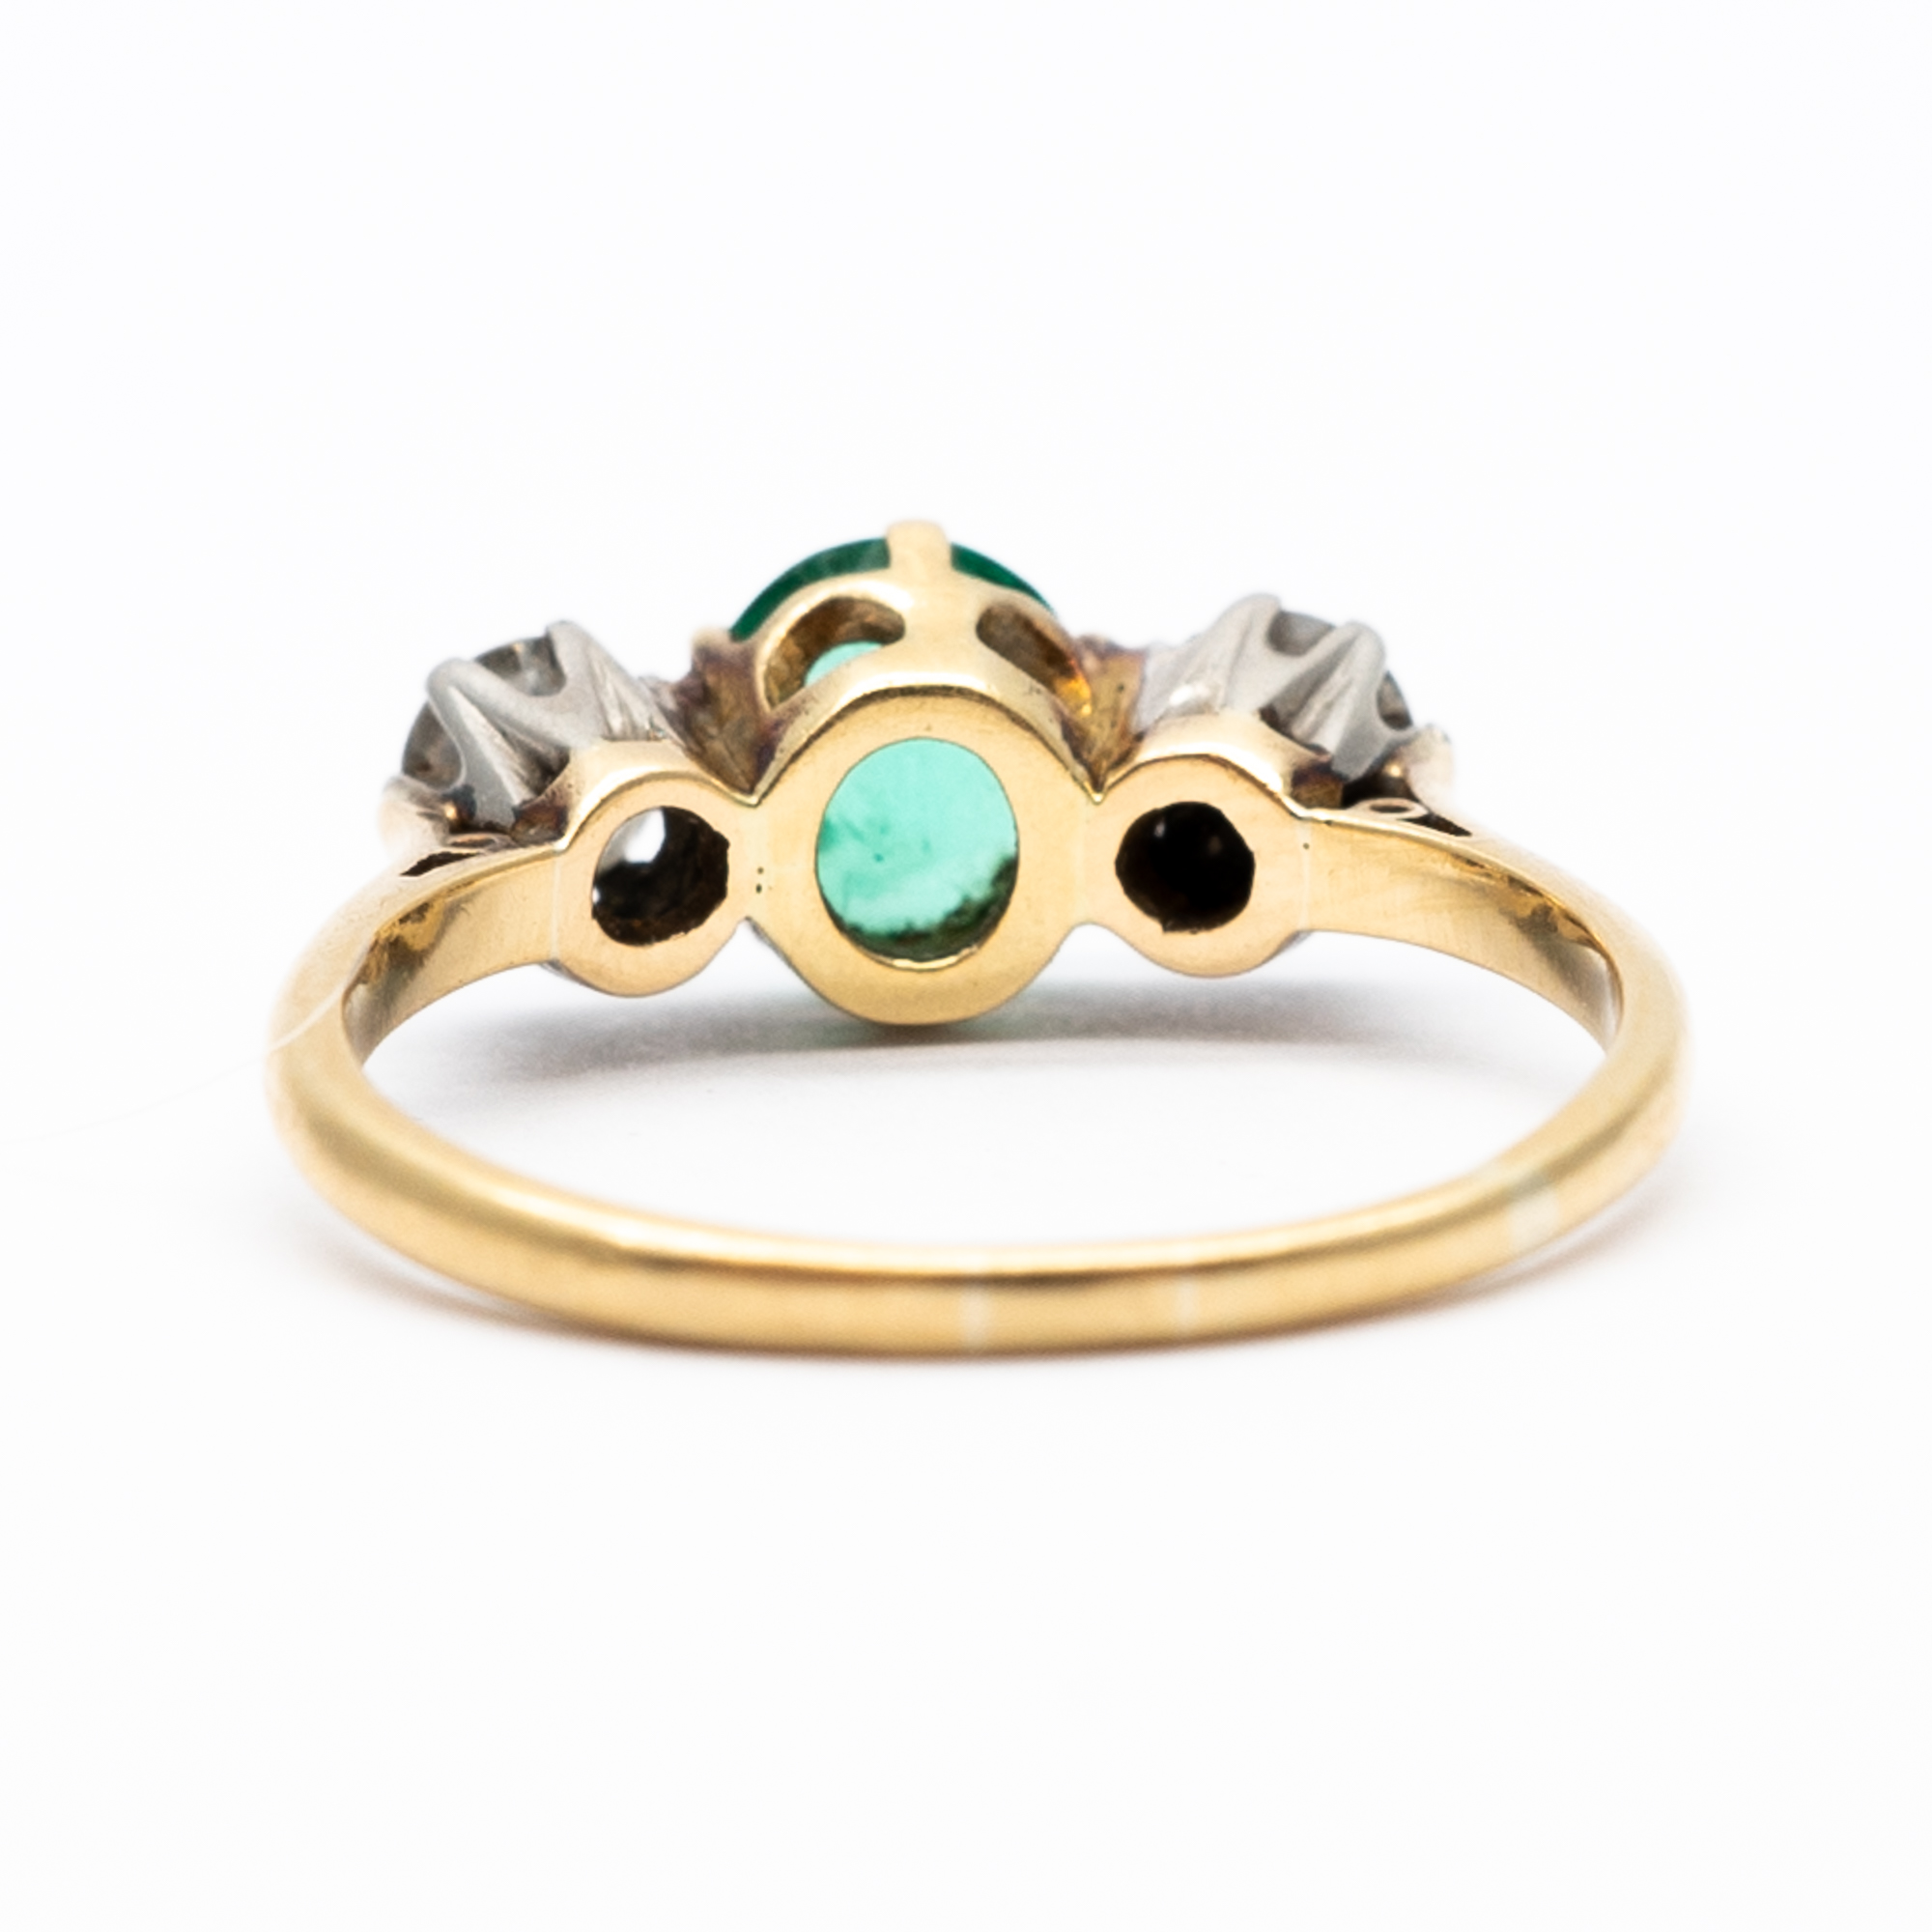 An 18ct yellow gold emerald and diamond ring - Image 3 of 6